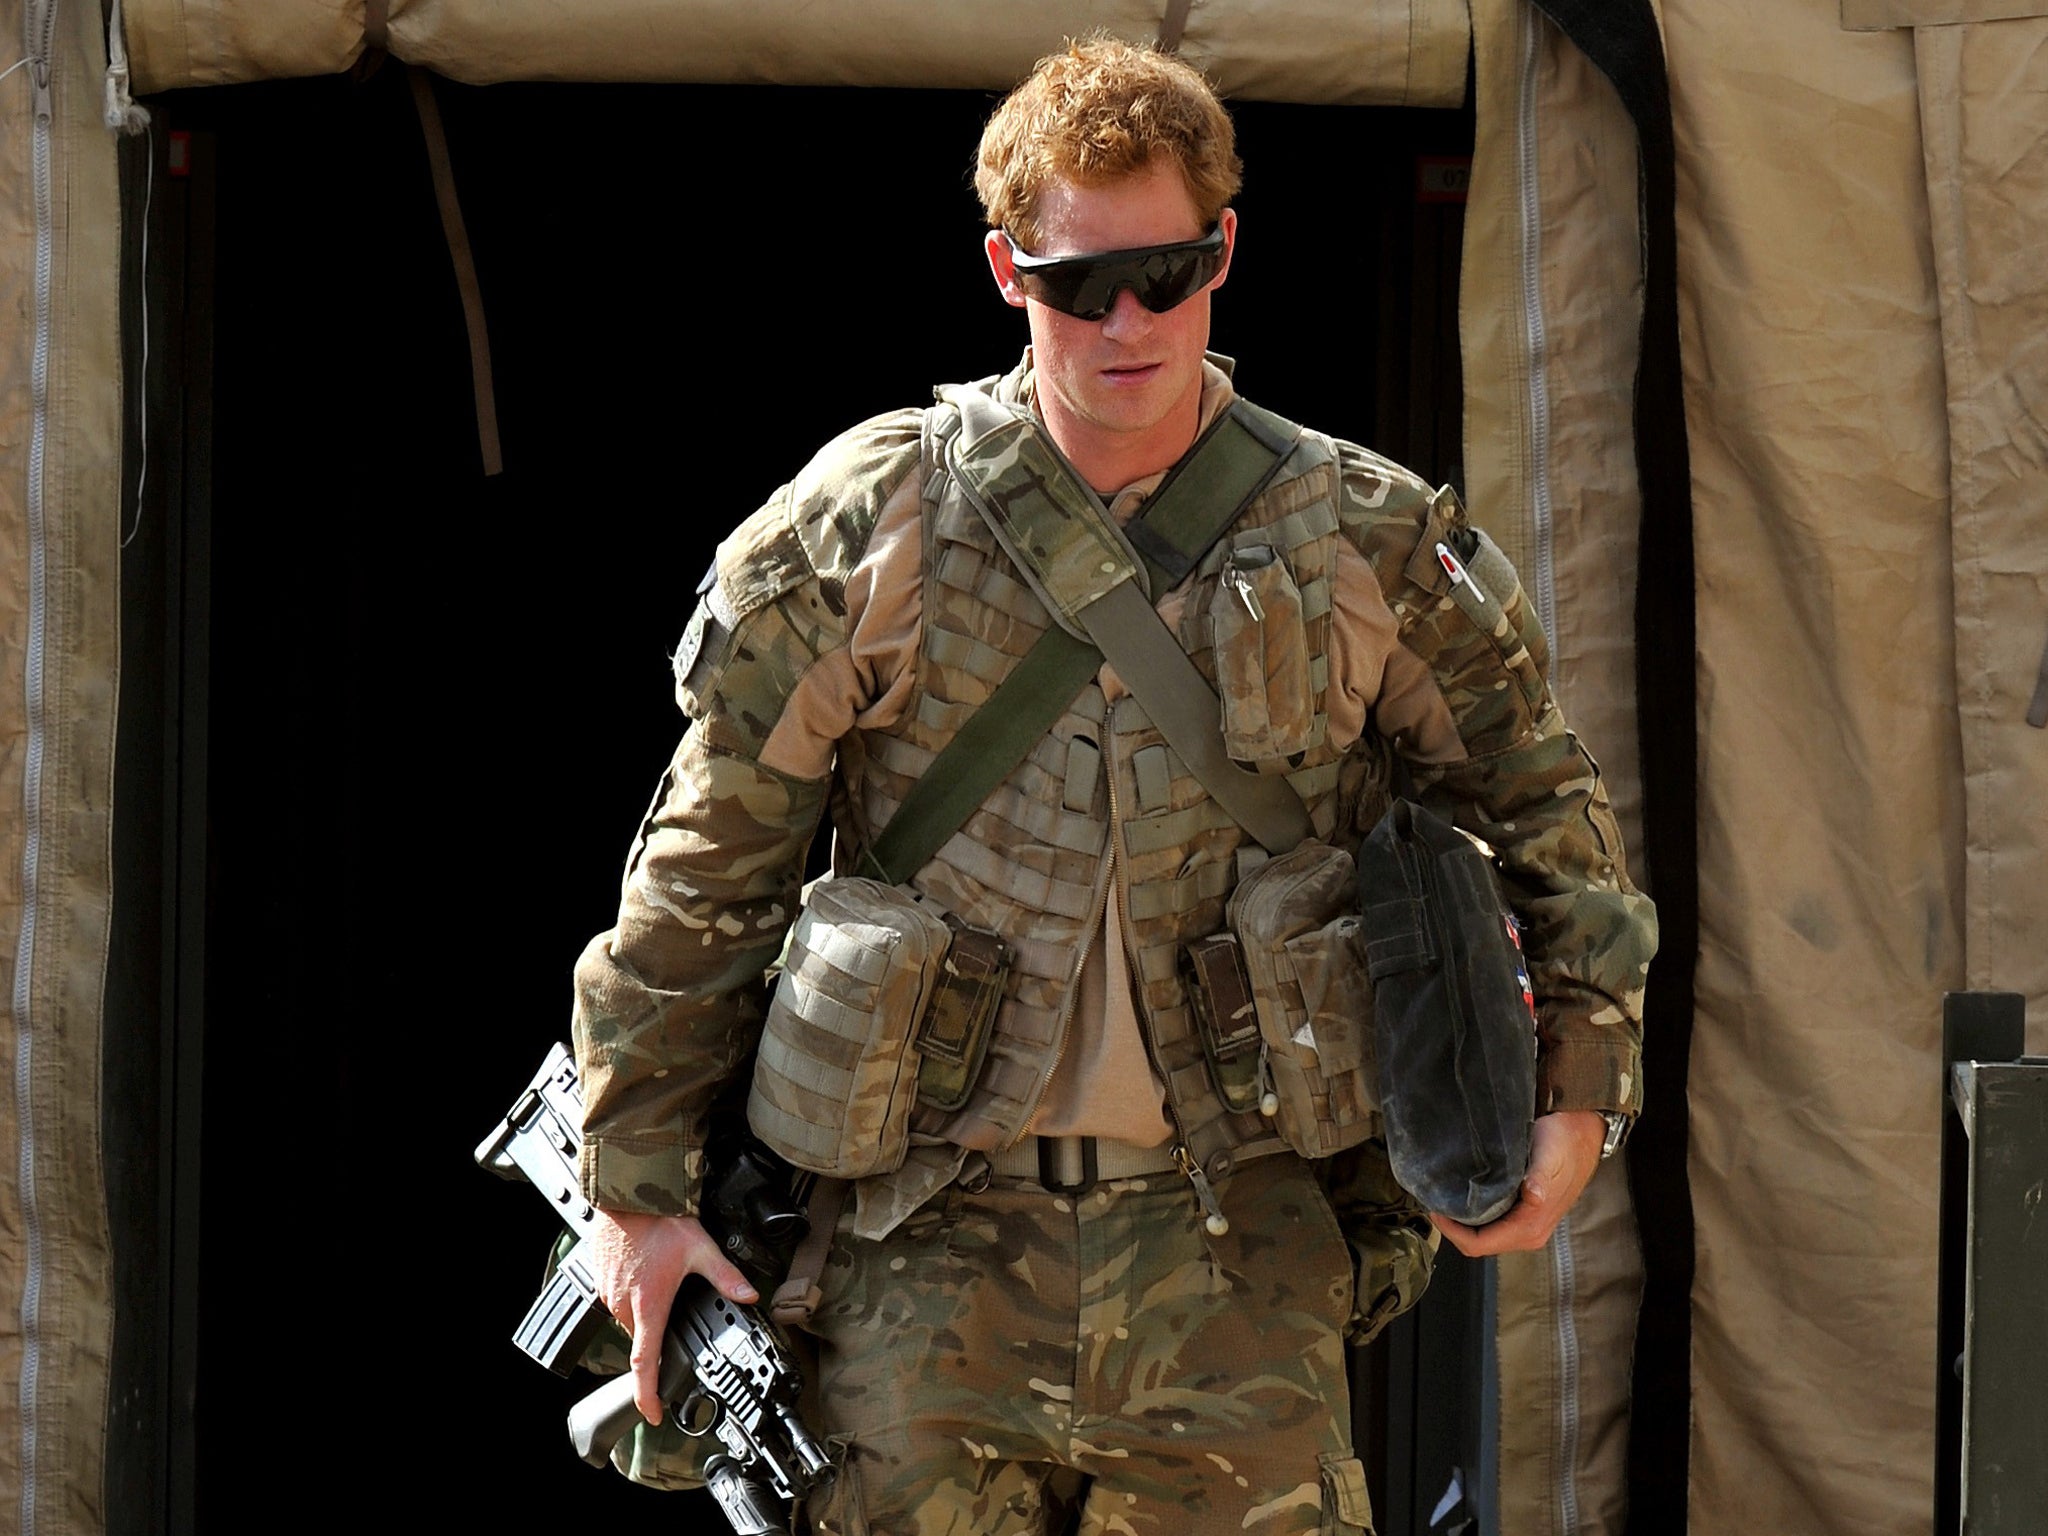 Prince Harry, or just plain Captain Wales as he is known in the British Army, at the British controlled flight-line in Camp Bastion